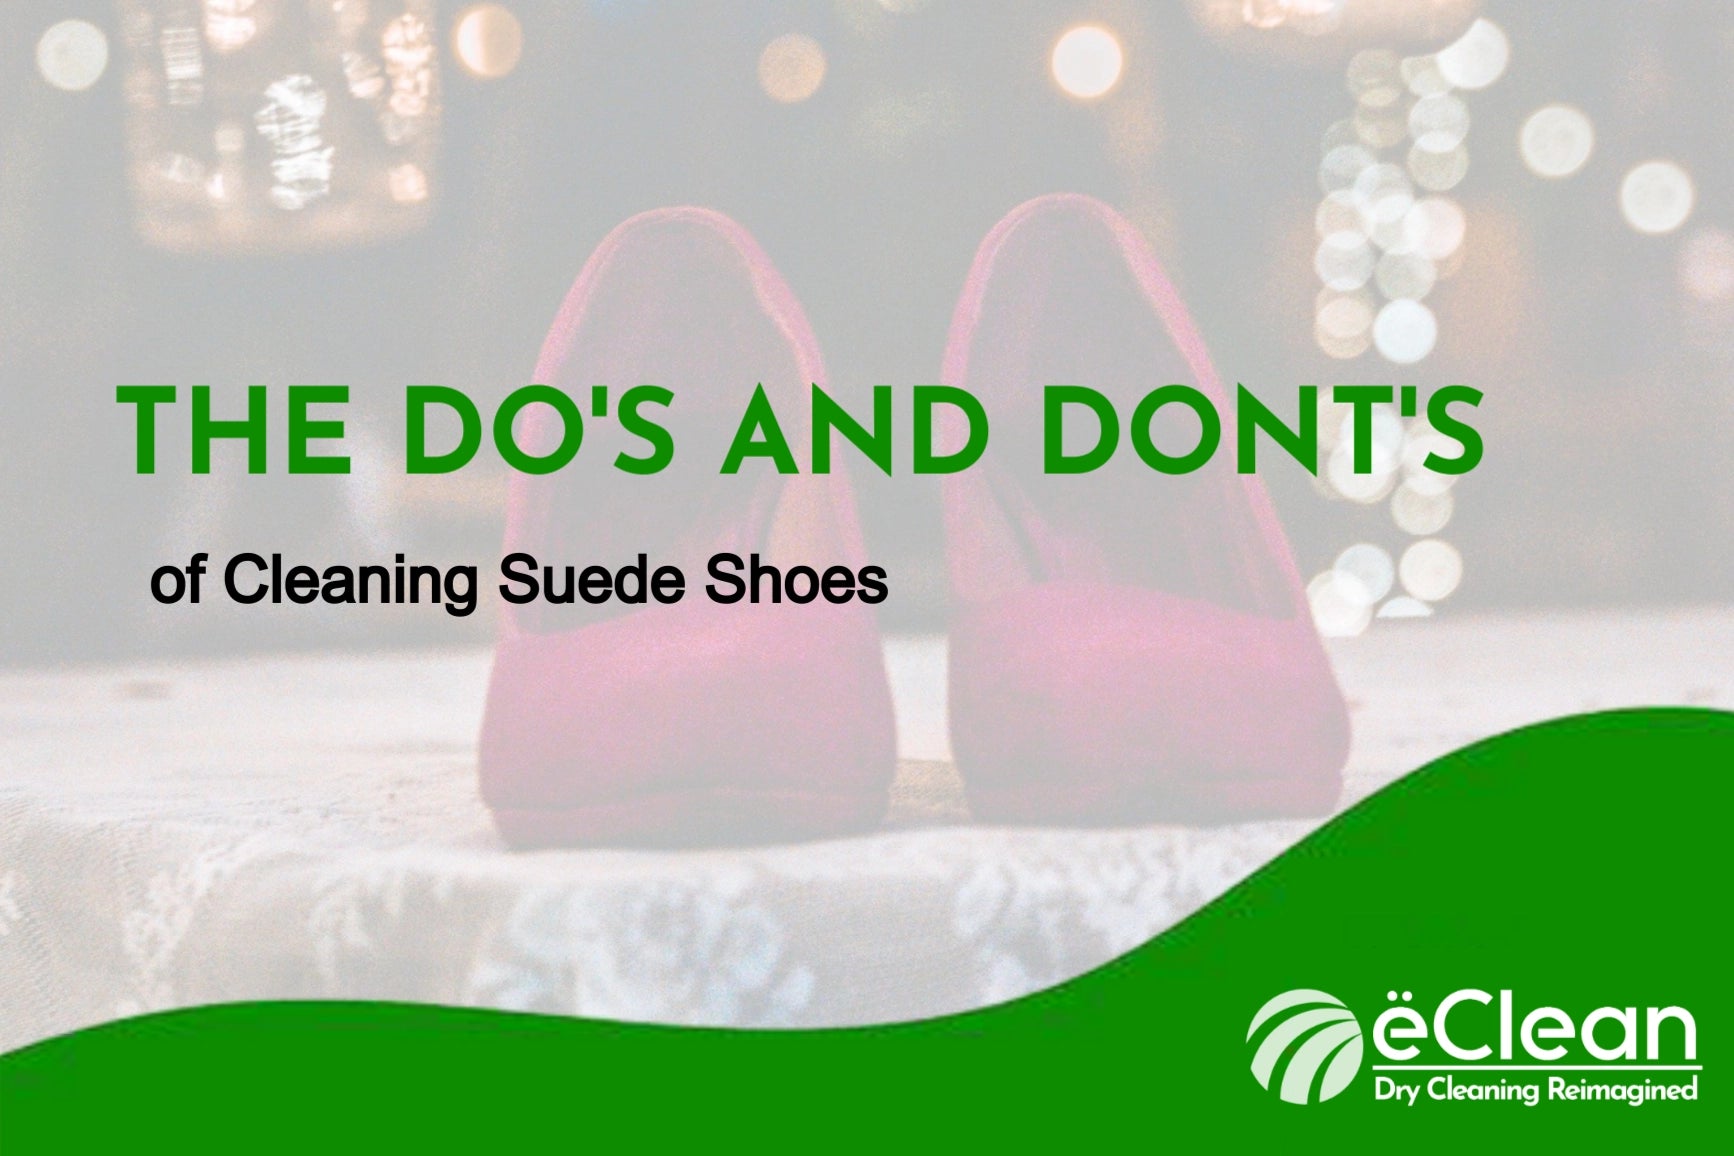 The Do's and Don'ts of Cleaning Suede Shoes